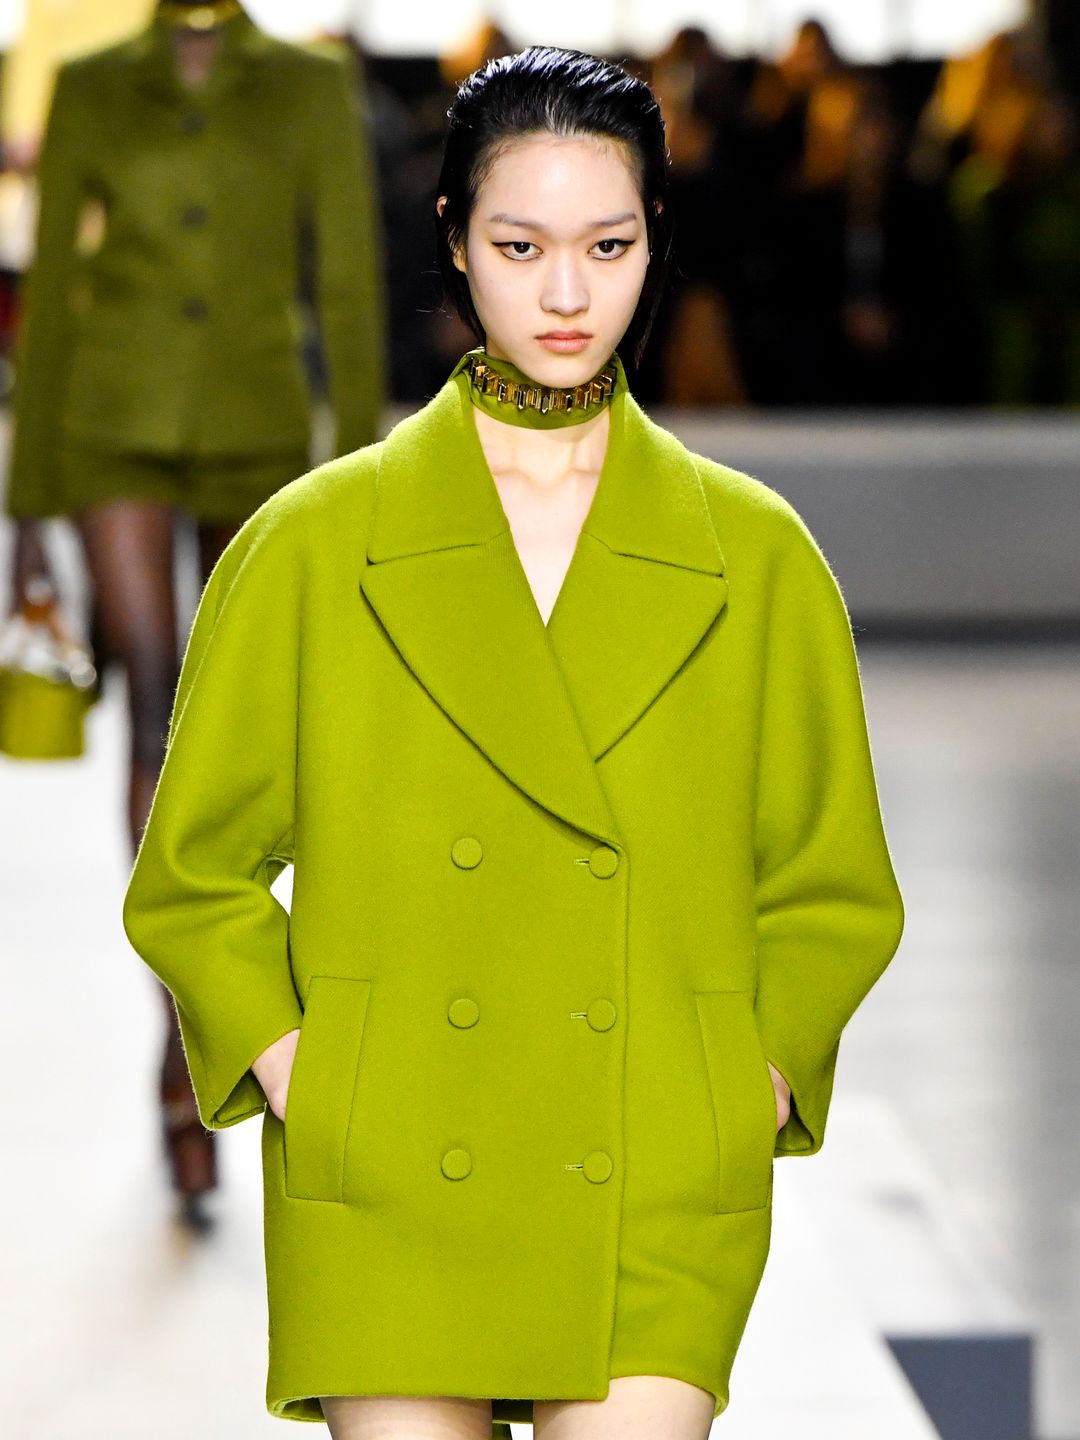 A model walks the runway during the Gucci Ready to Wear Fall/Winter 2024-2025 fashion show in a lime green coat